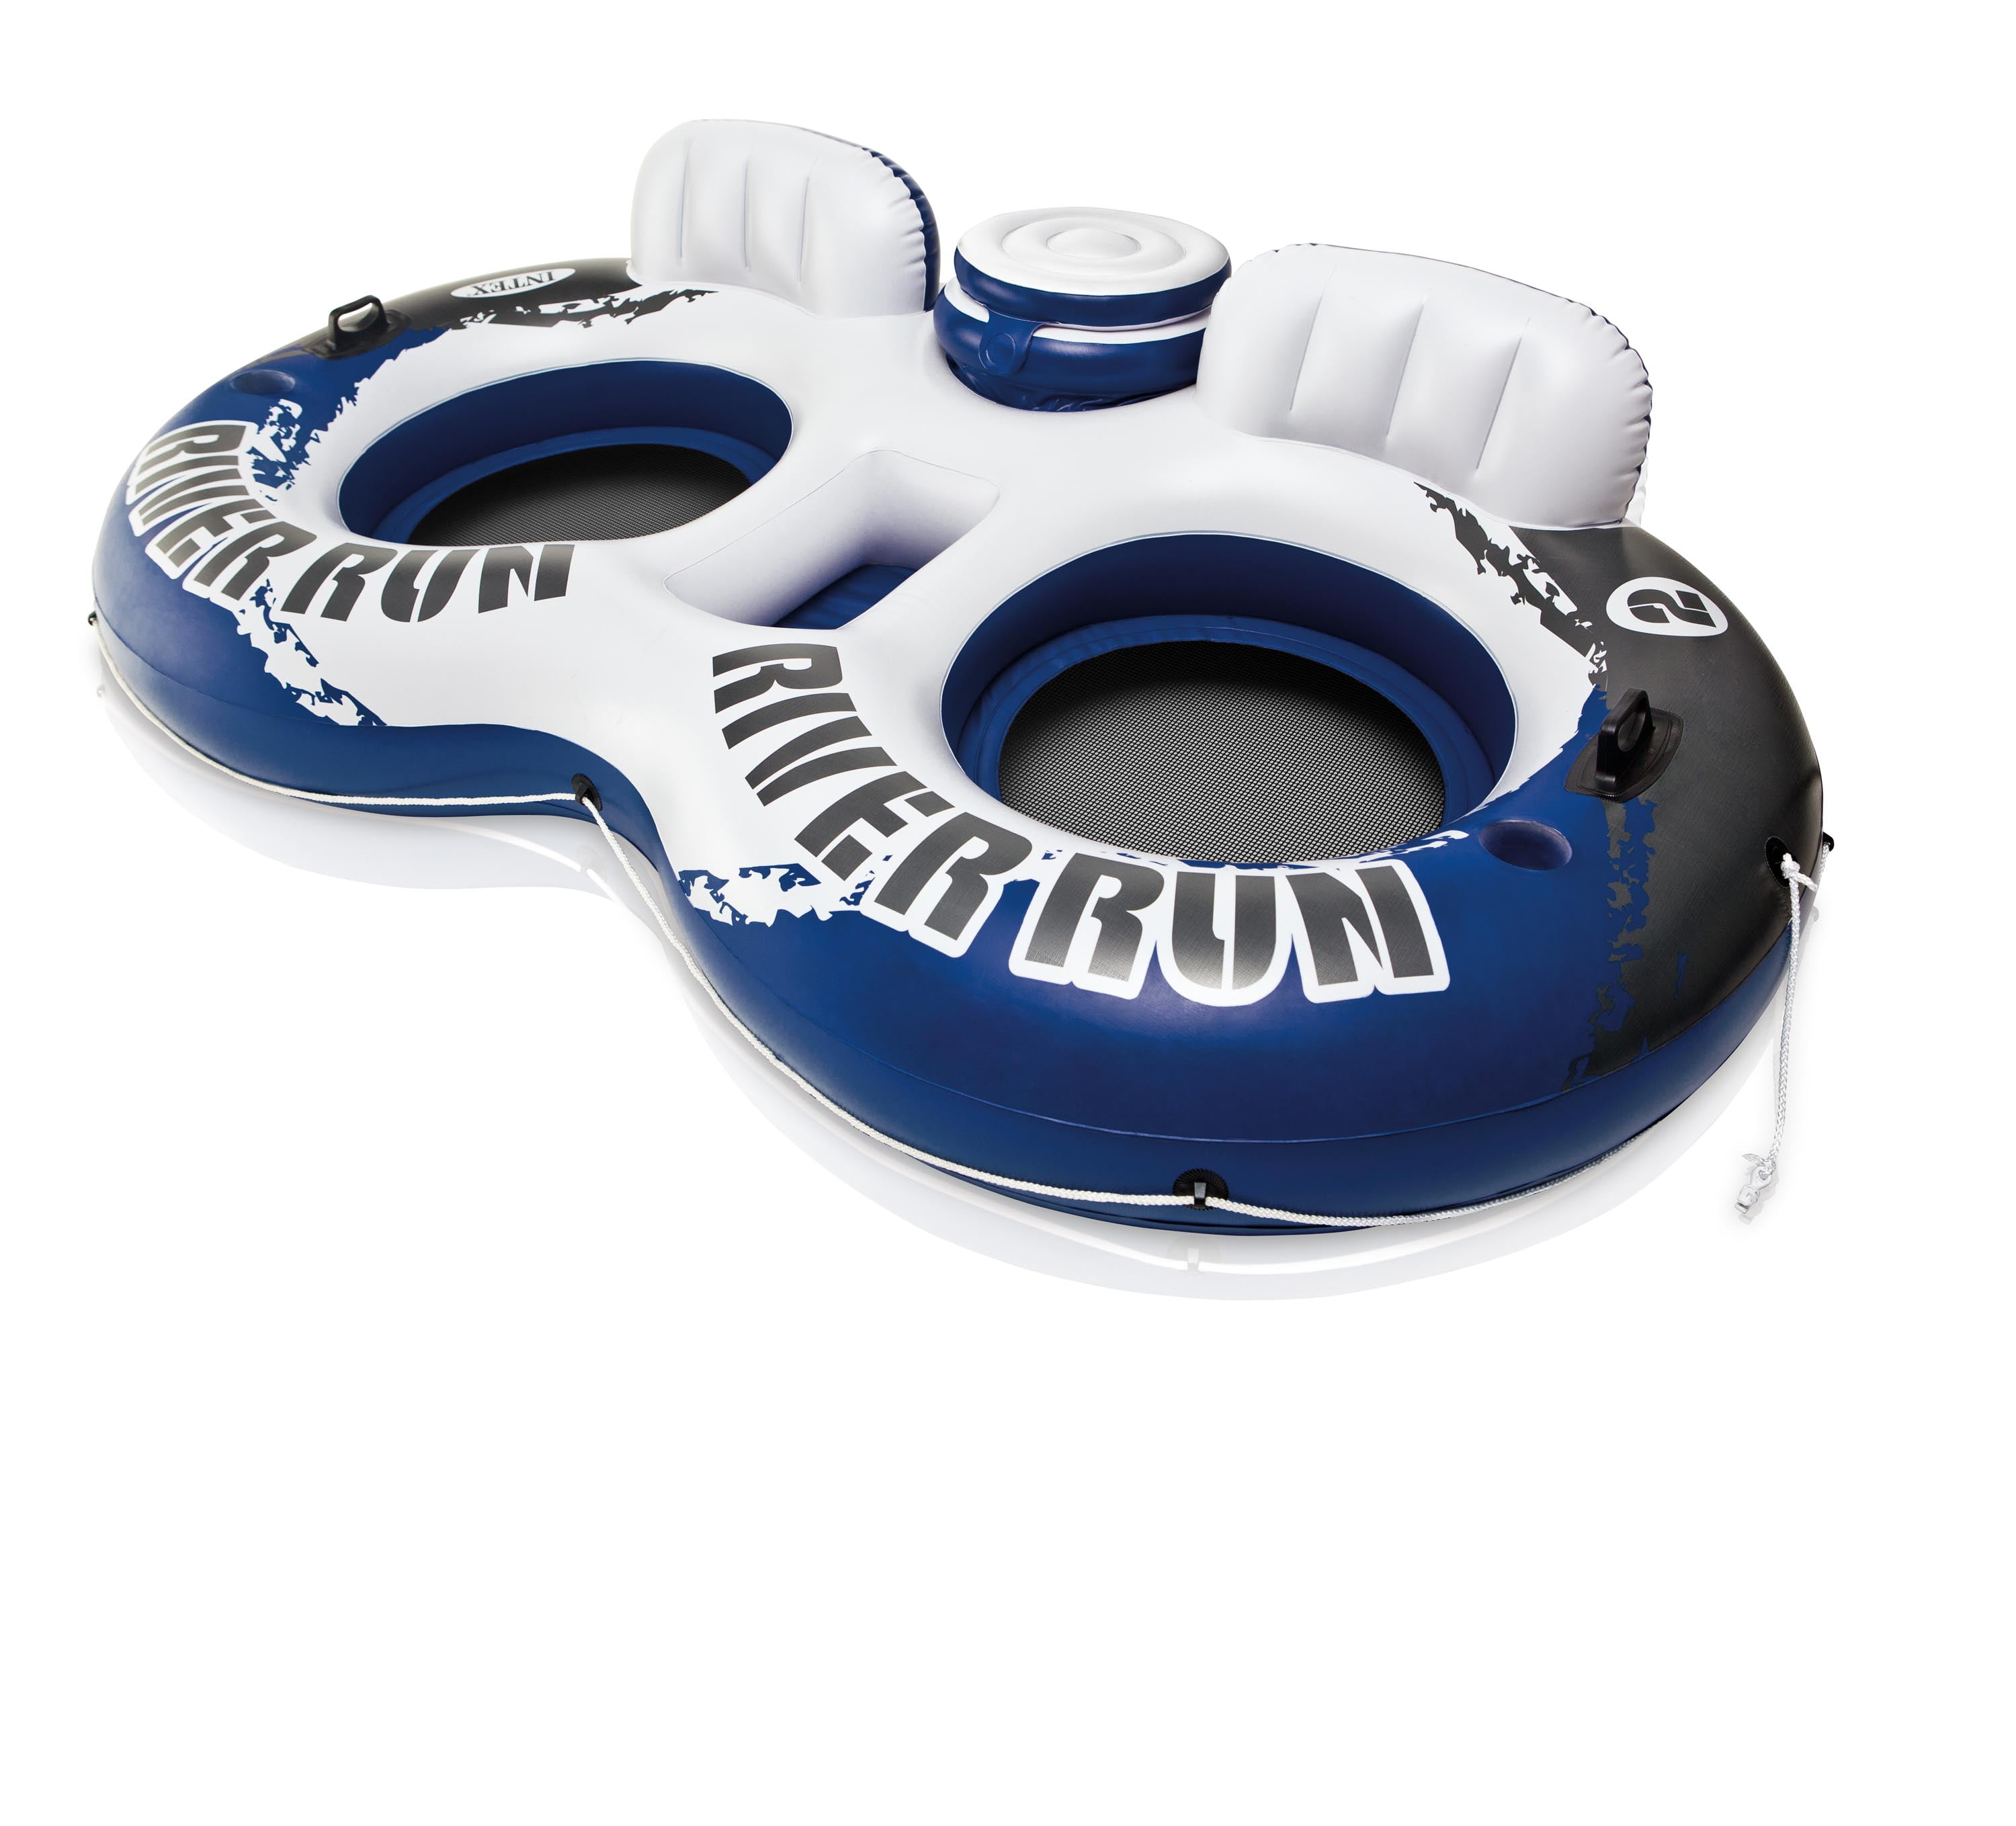 Solstice 17002 Superchill Duo Inflatable Double Tube Floating 2 Seater for sale online 